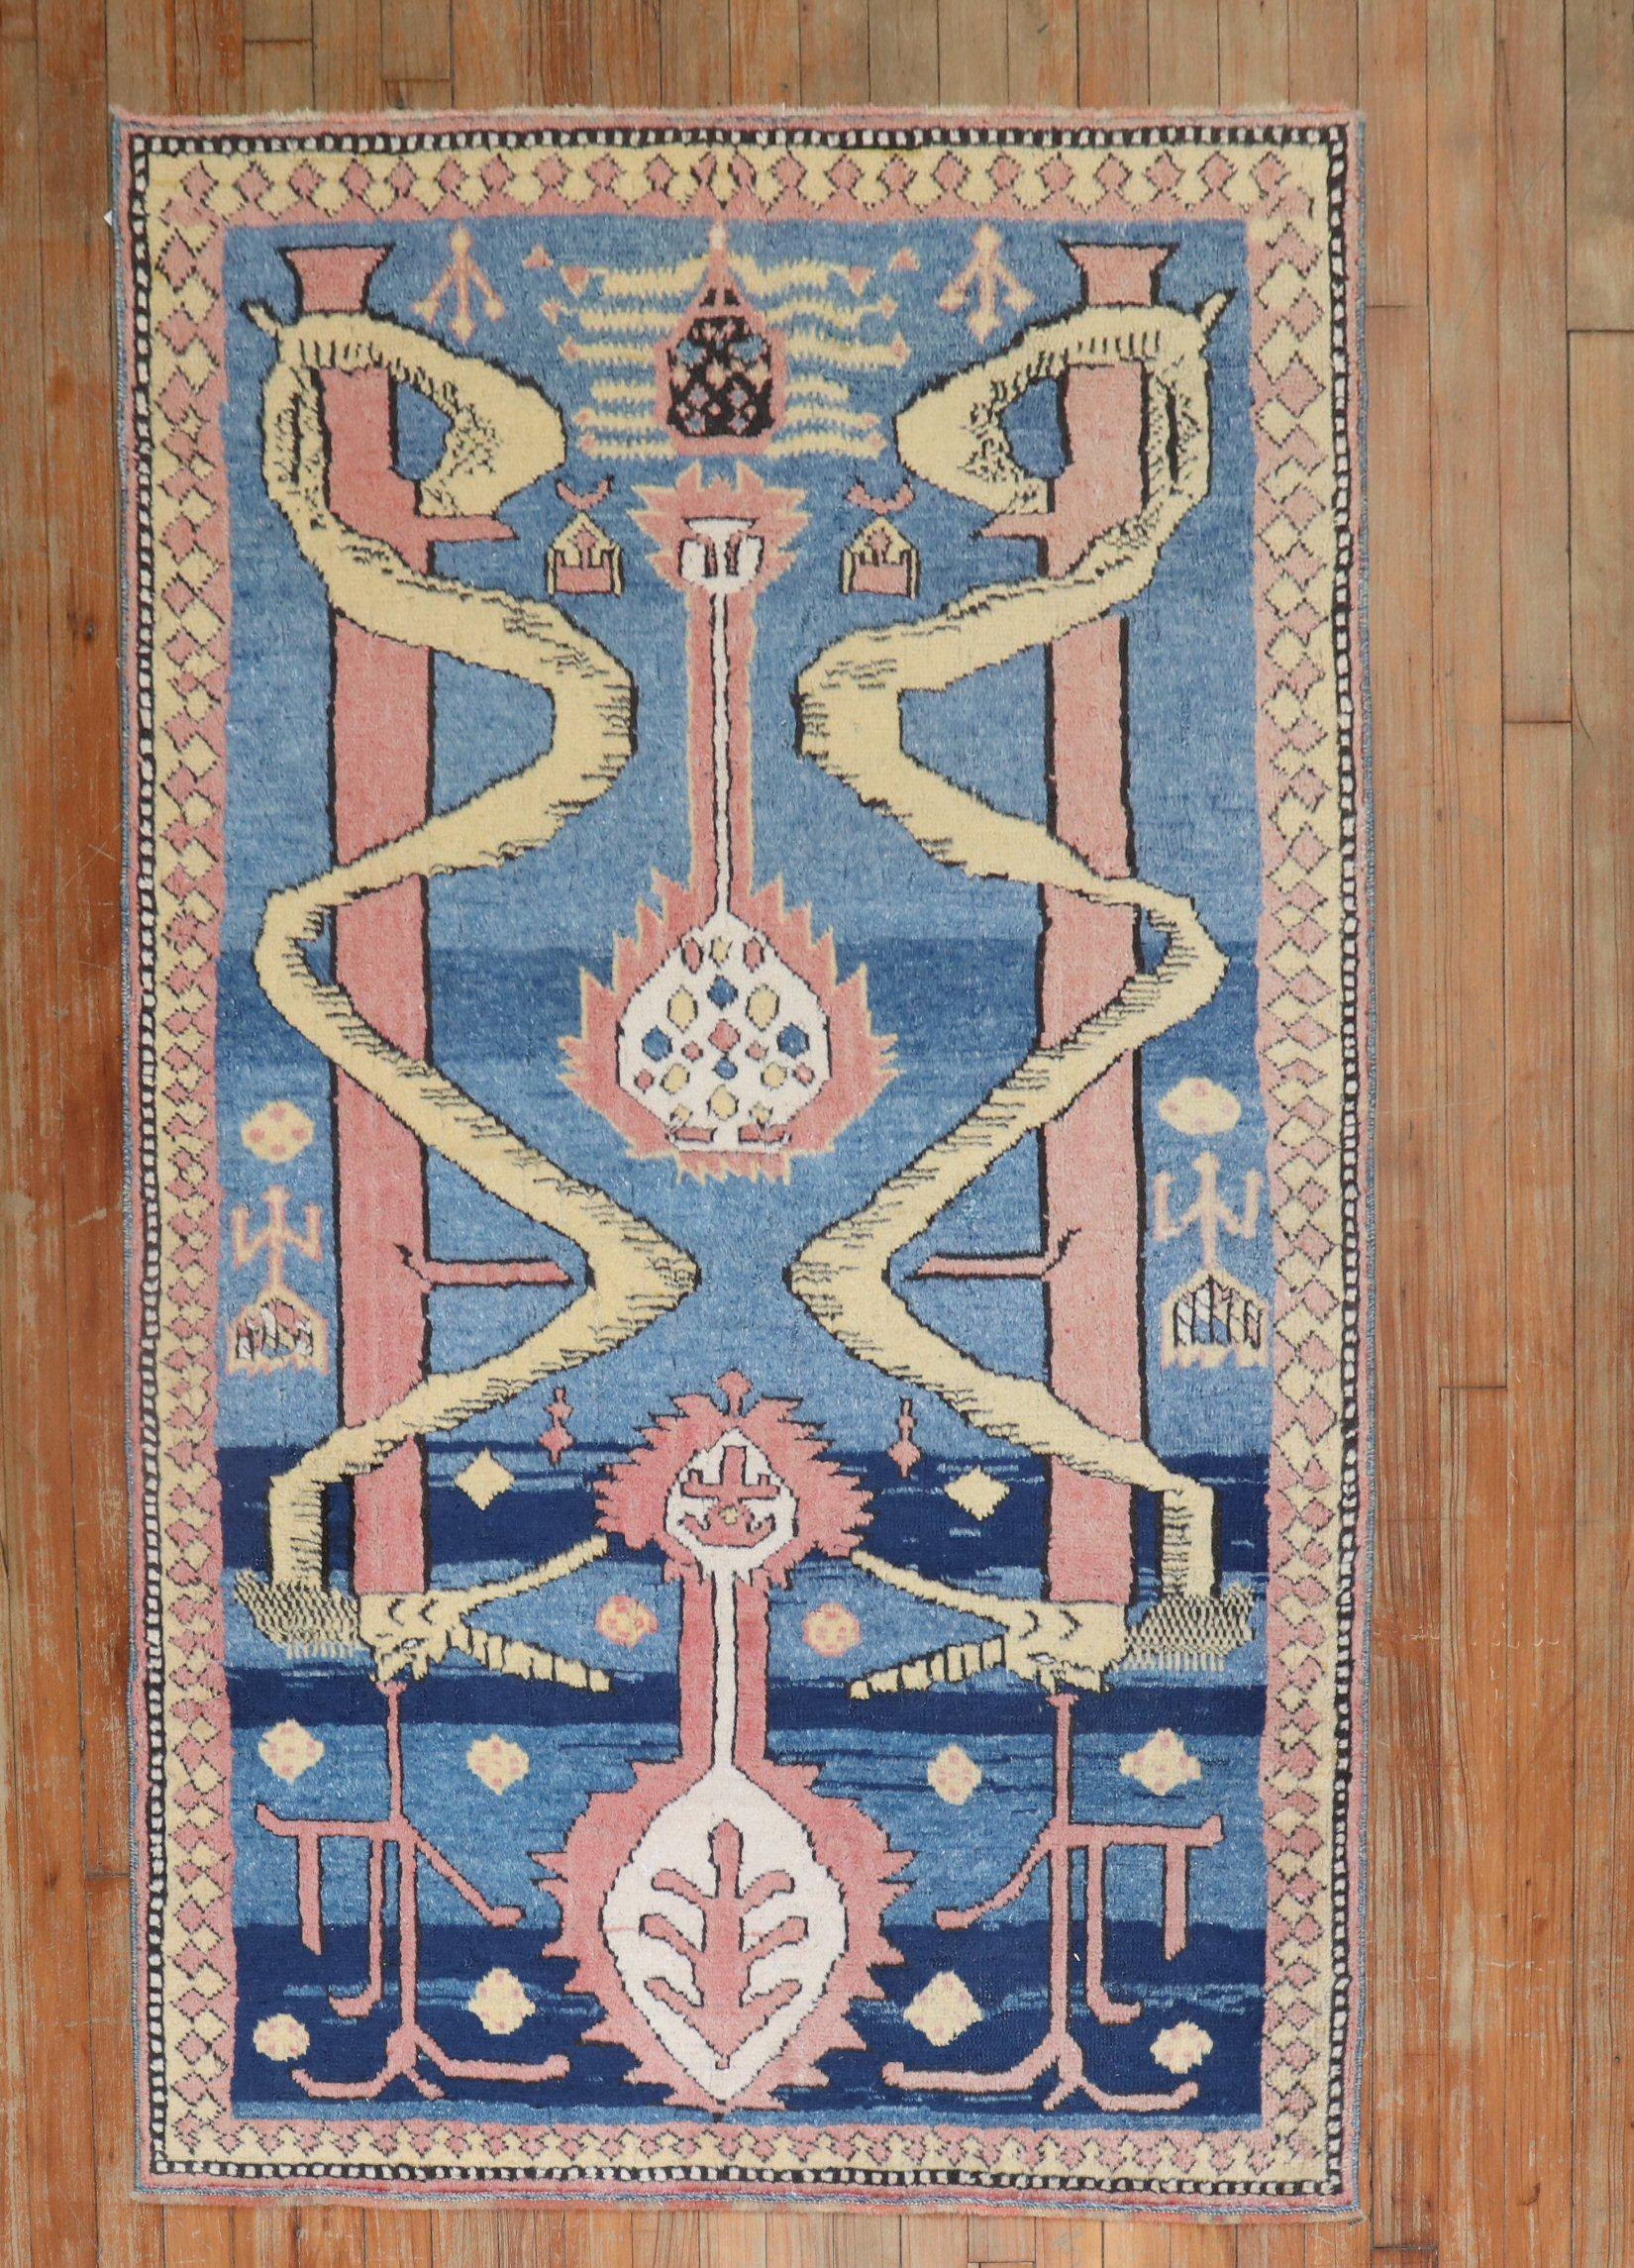 3rd quarter of the 20th Century Turkish Anatolian rug depicting 2 slithering snakes on a striated blue ground.

Measures: 3'5' 'x 5'7''.